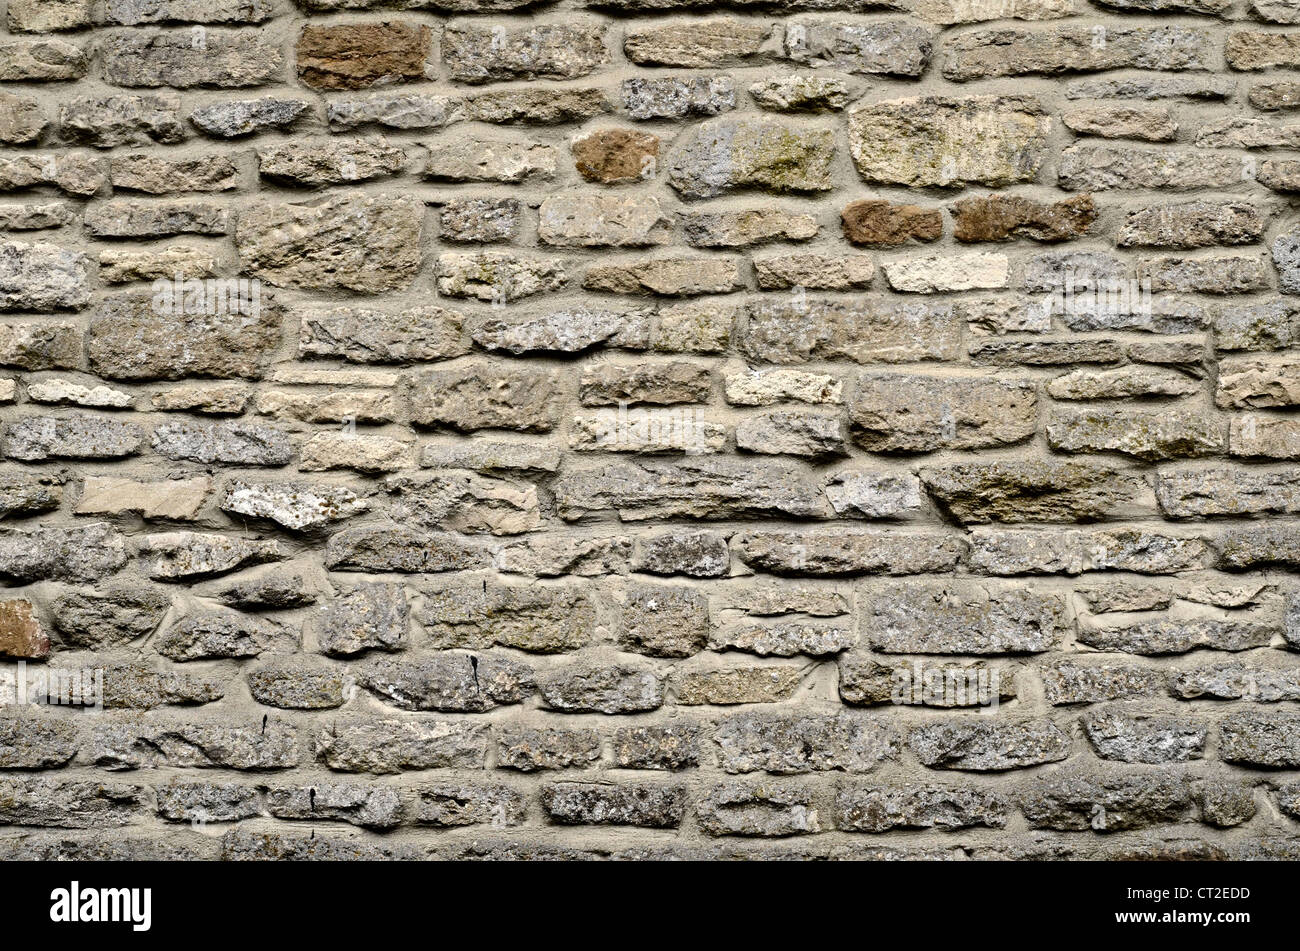 Stone wall / detail of sandstone blockwork - Cotswolds. Visual allegory for 'firewall' or file 'access denied'. Stock Photo